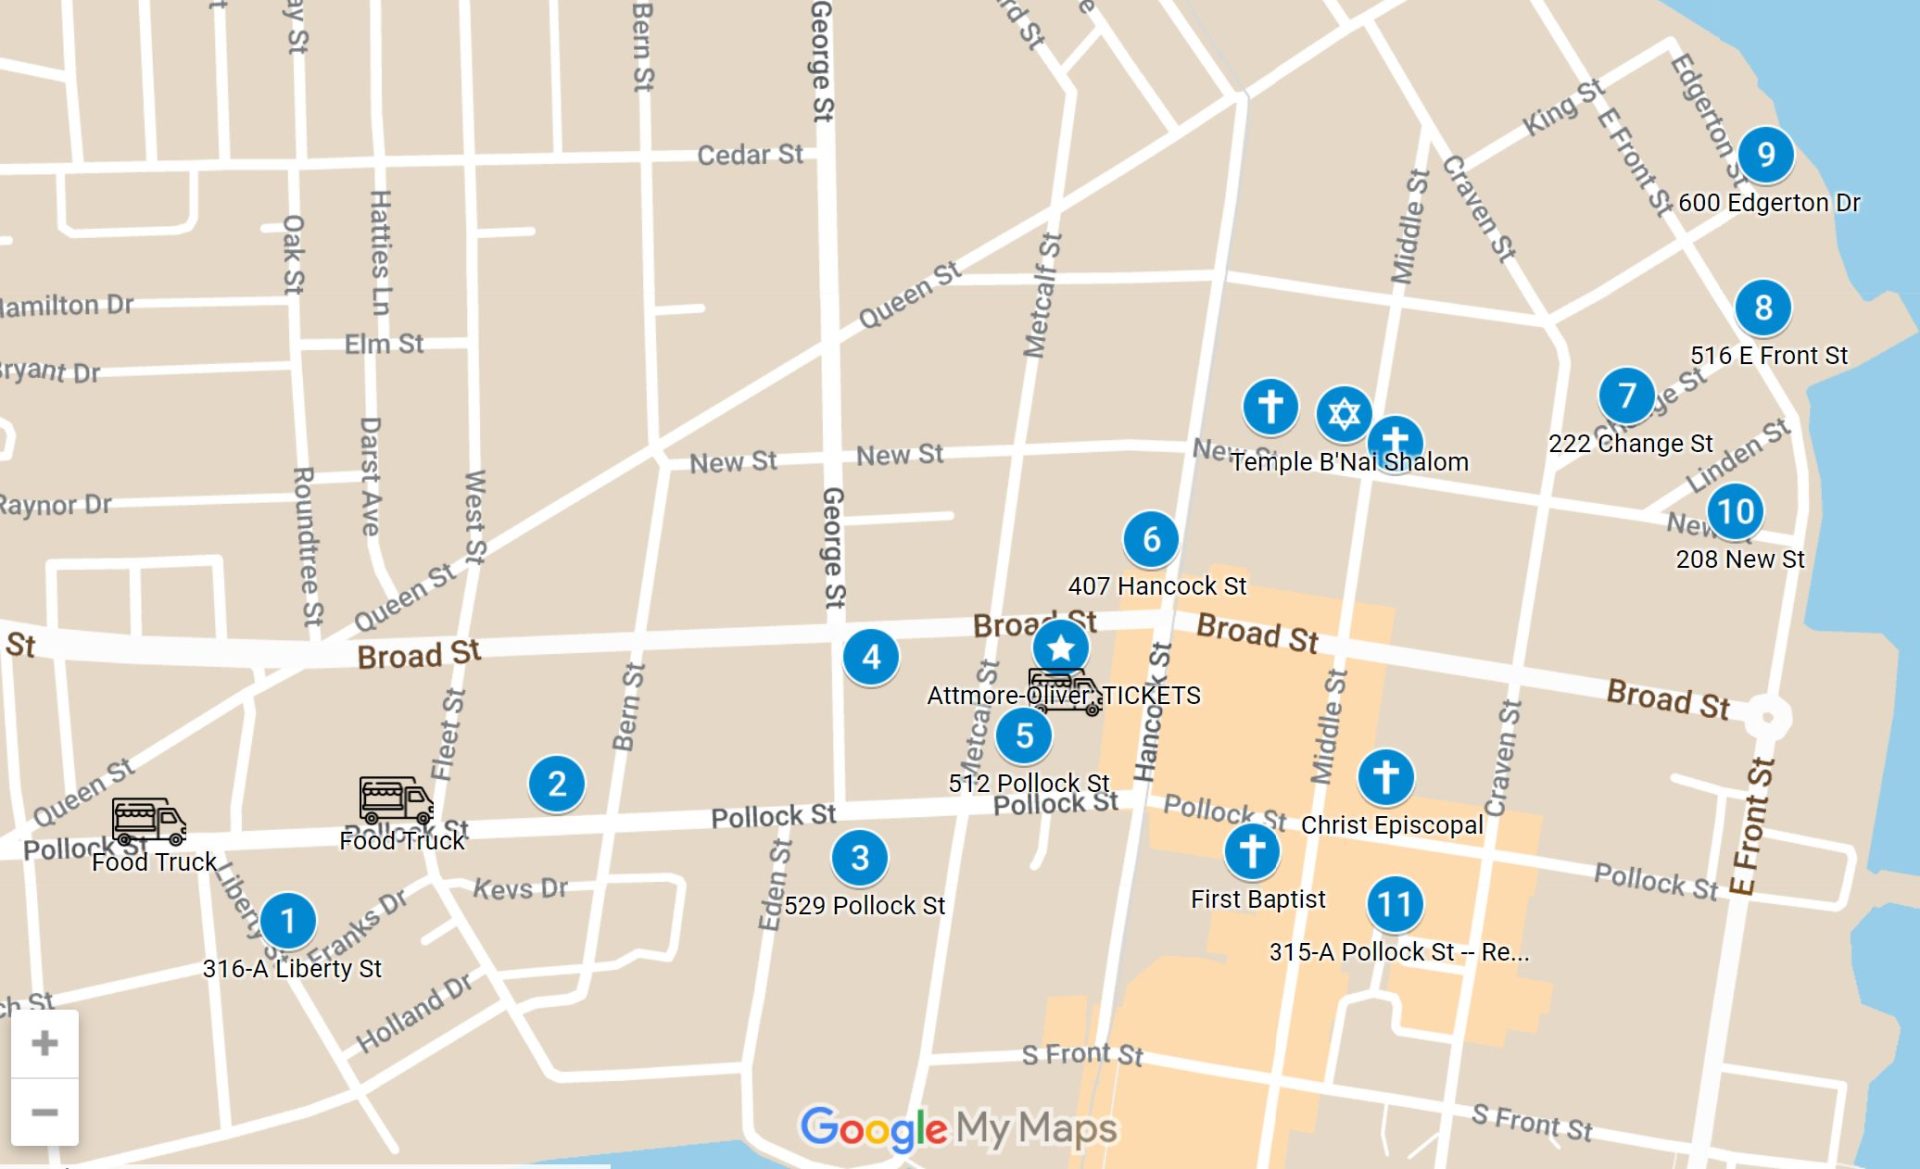 Click here for online map showing all homes, churches, and special attractions